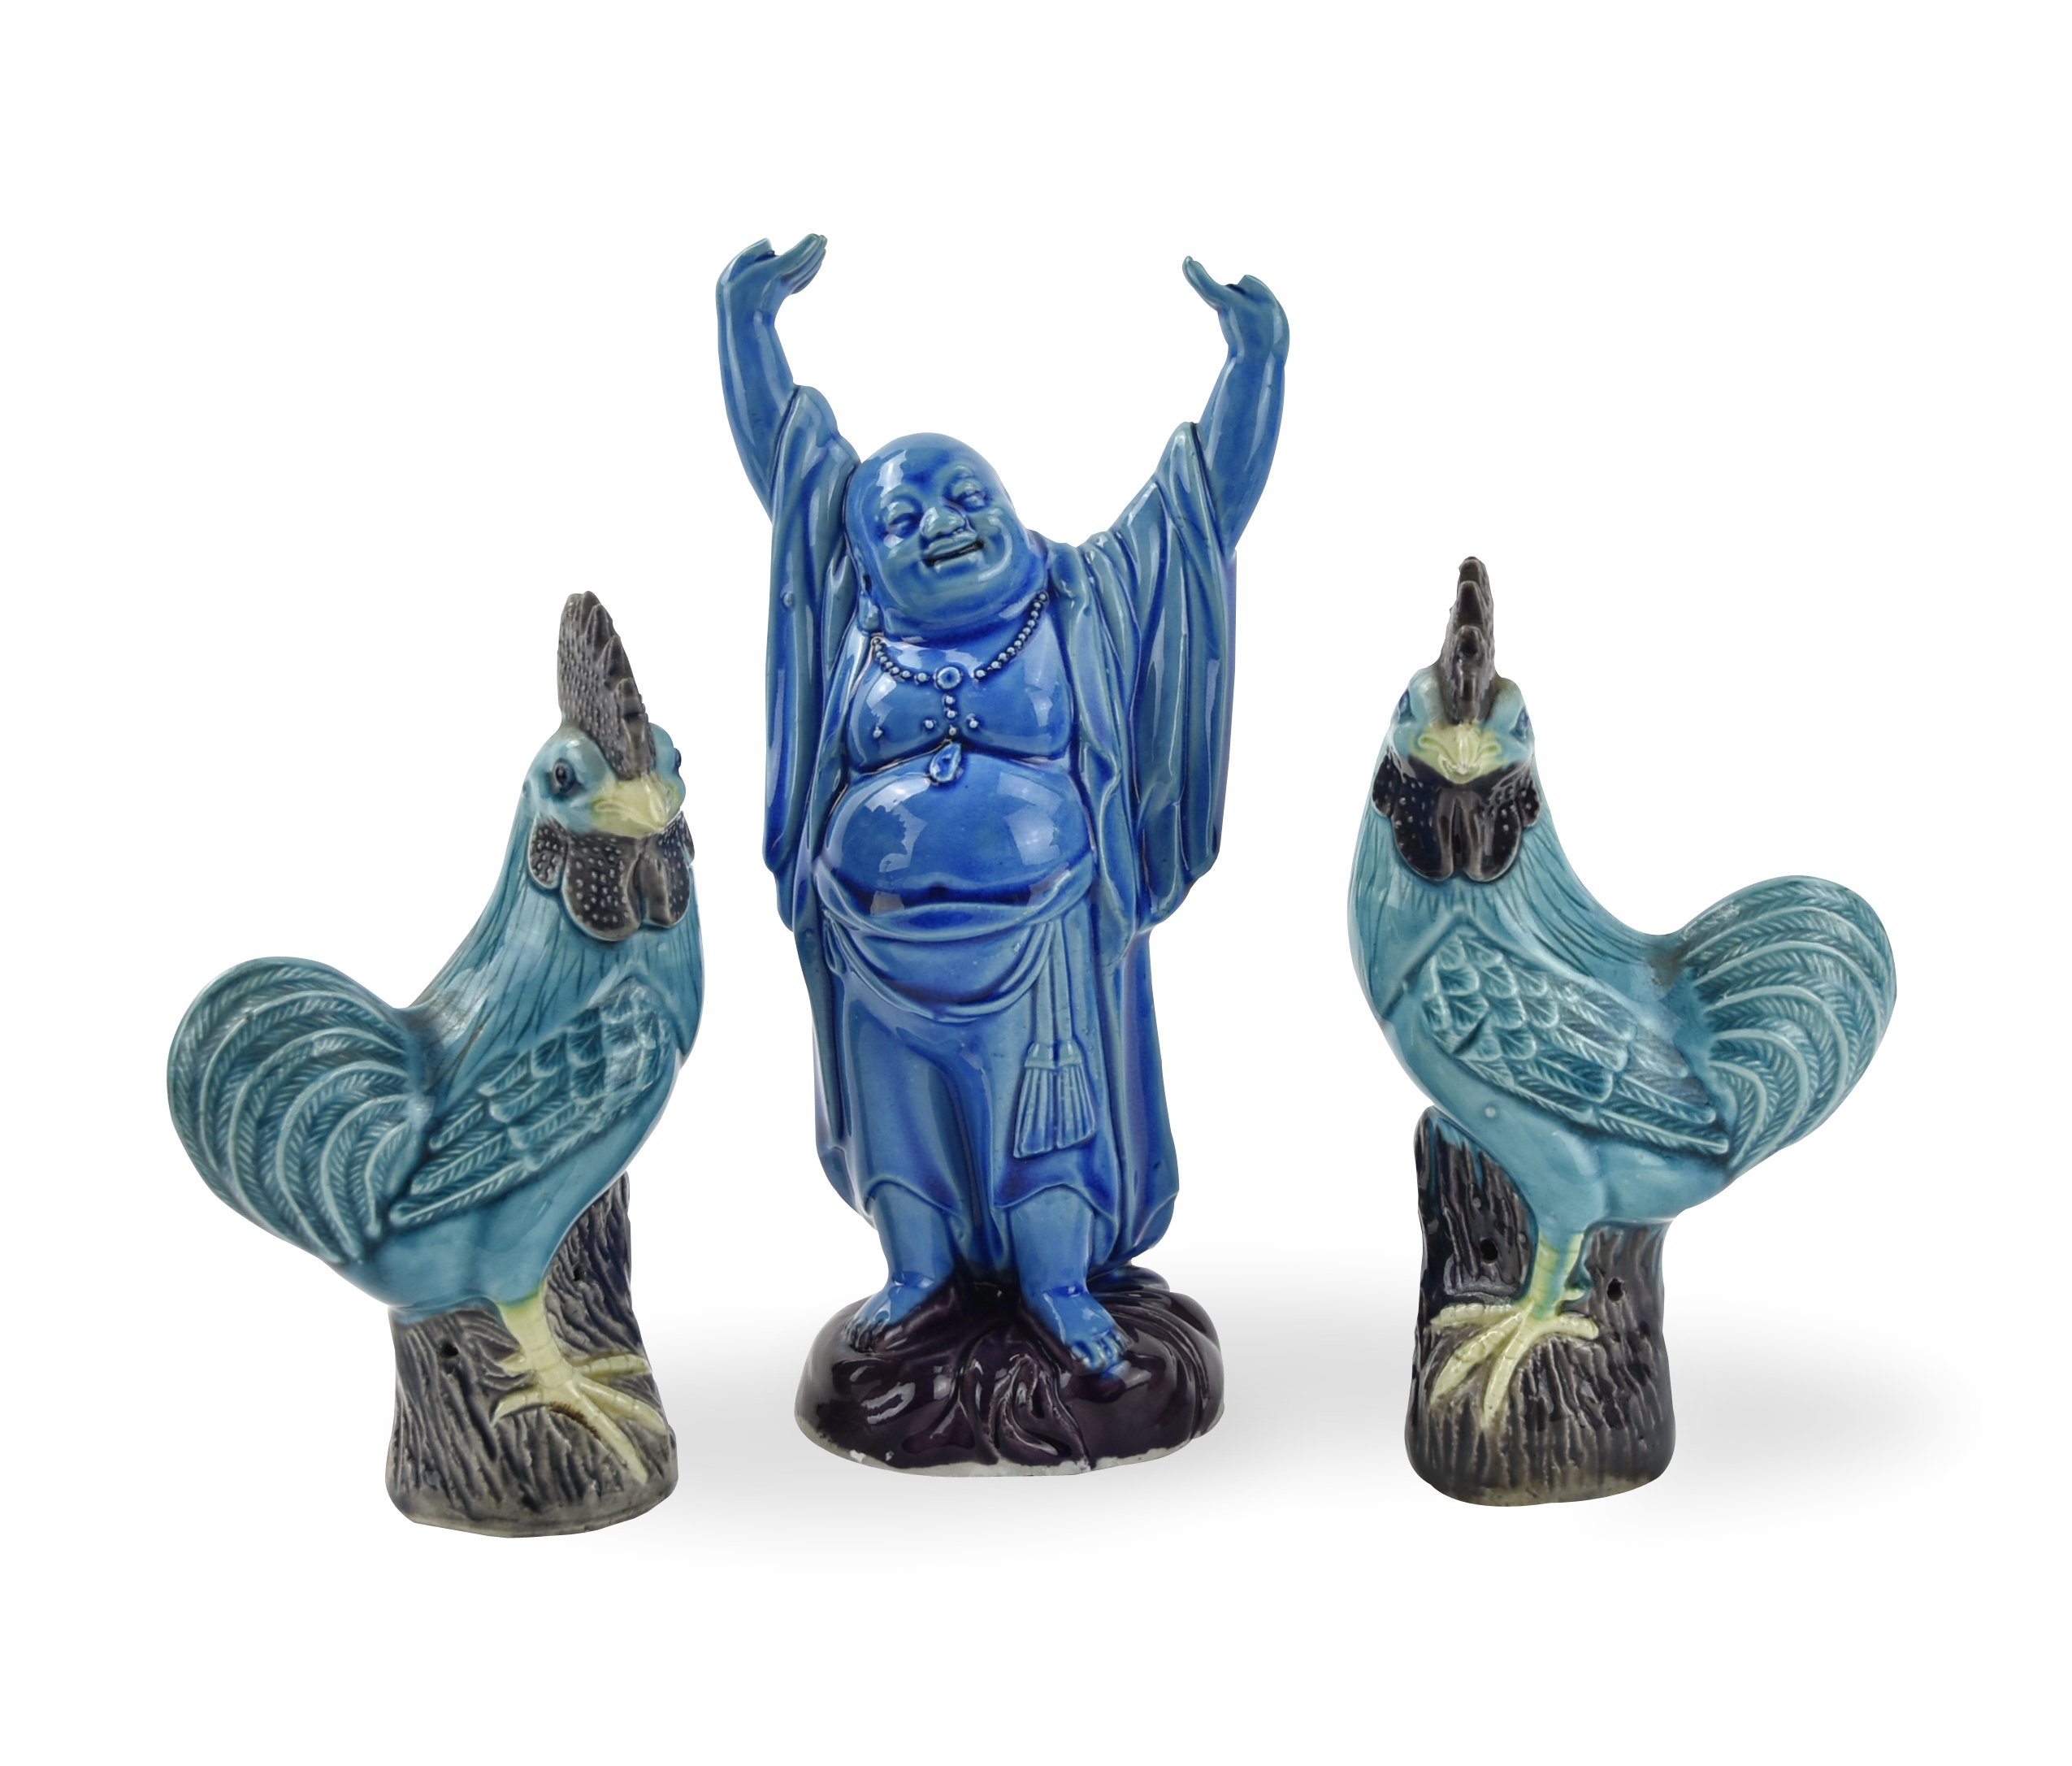  2 PEACOCK GLAZED ROOSTERS BUDDHA 3392d5